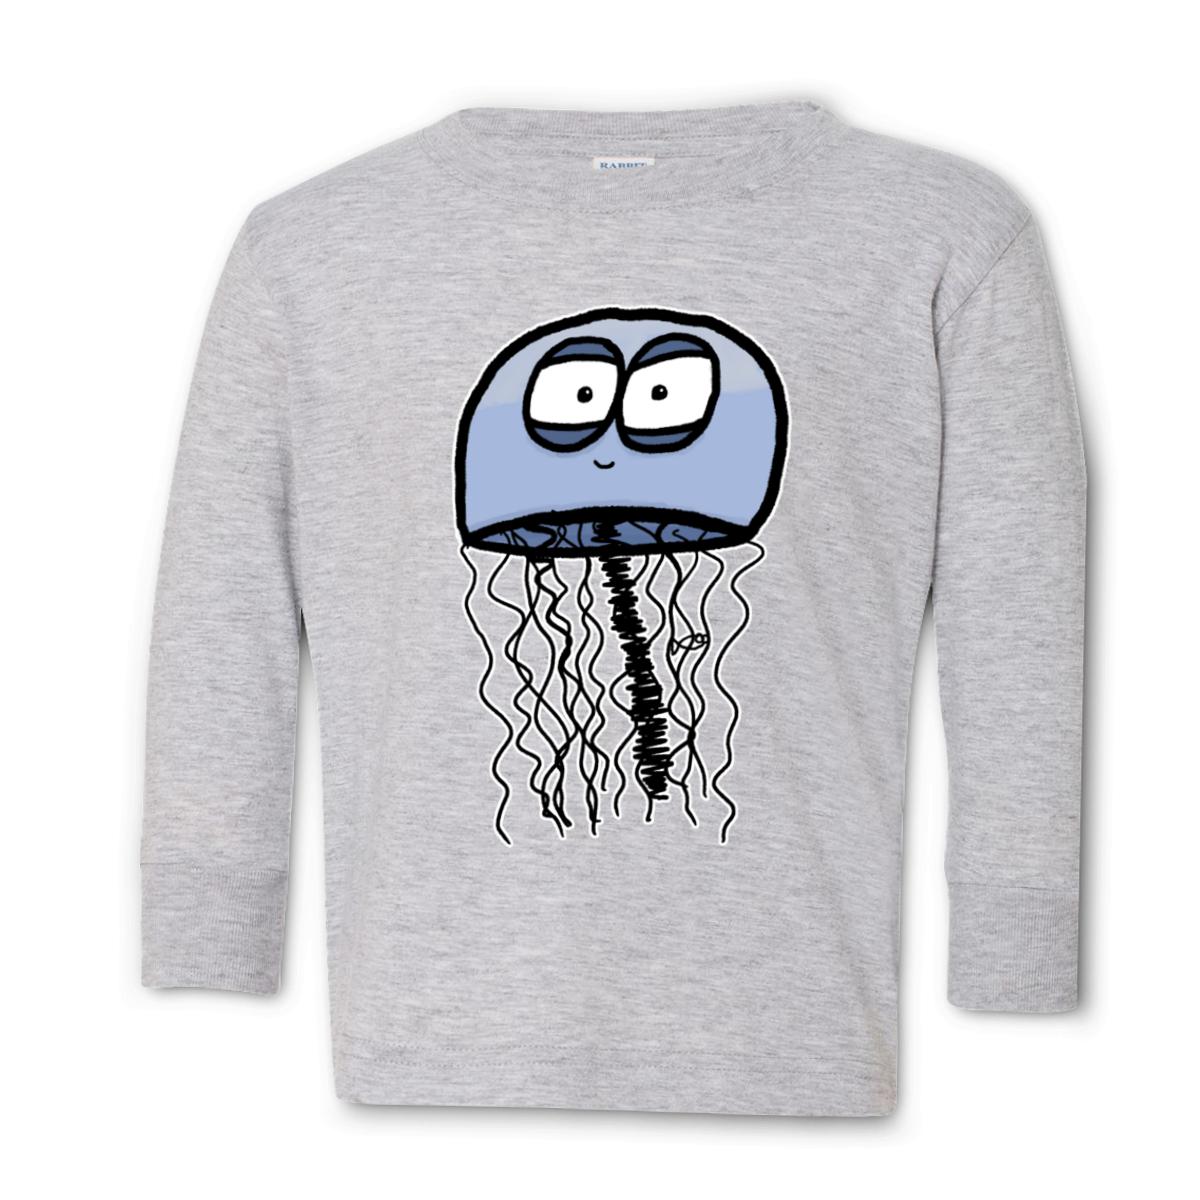 Jelly Fish Toddler Long Sleeve Tee 56T heather